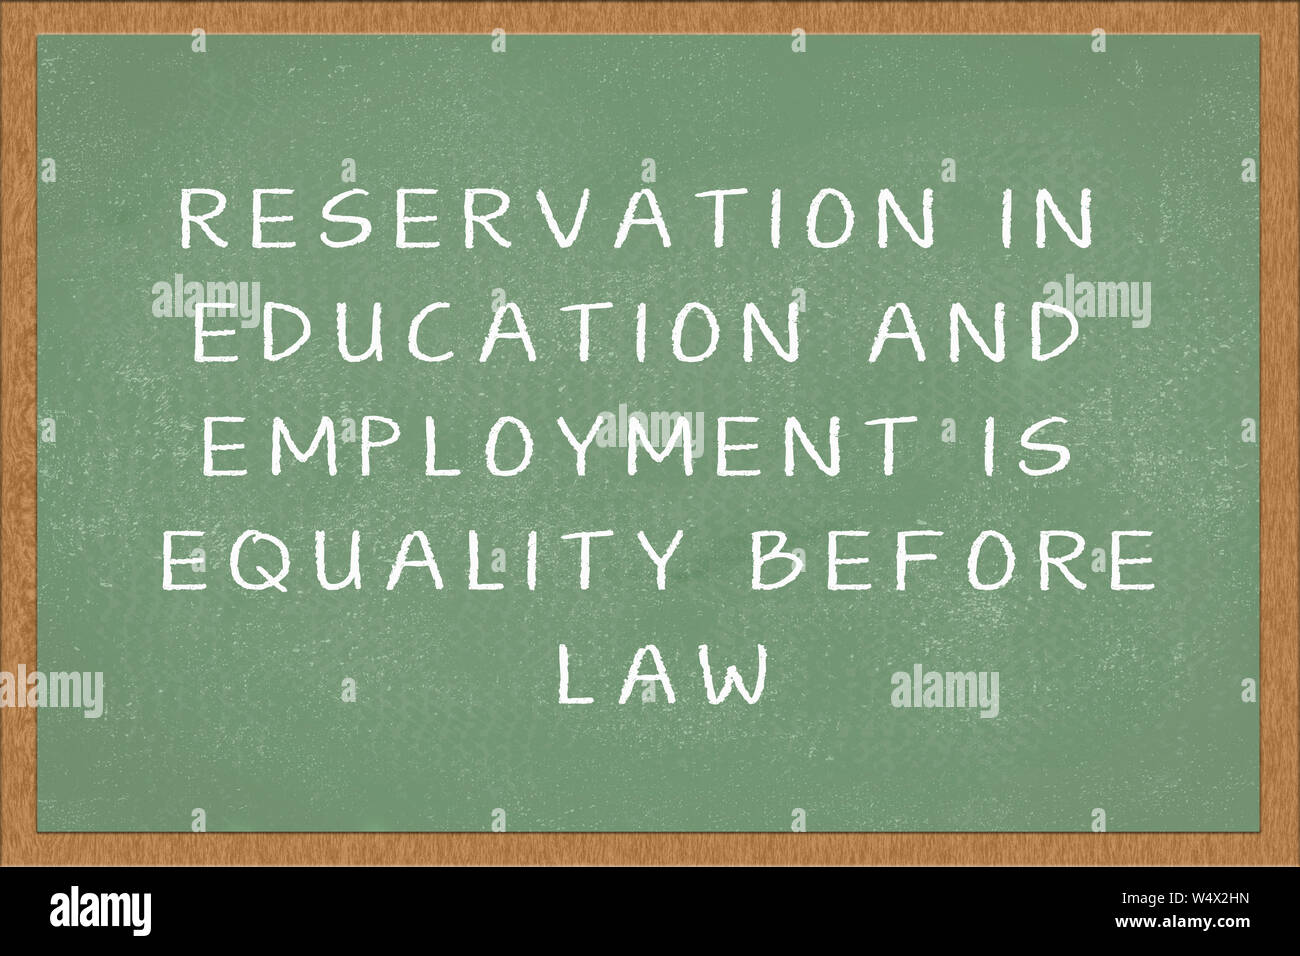 Reservation in education and employment is equality before law, Reservation system in india is to provided to give equal opportunity to the lower class Stock Photo